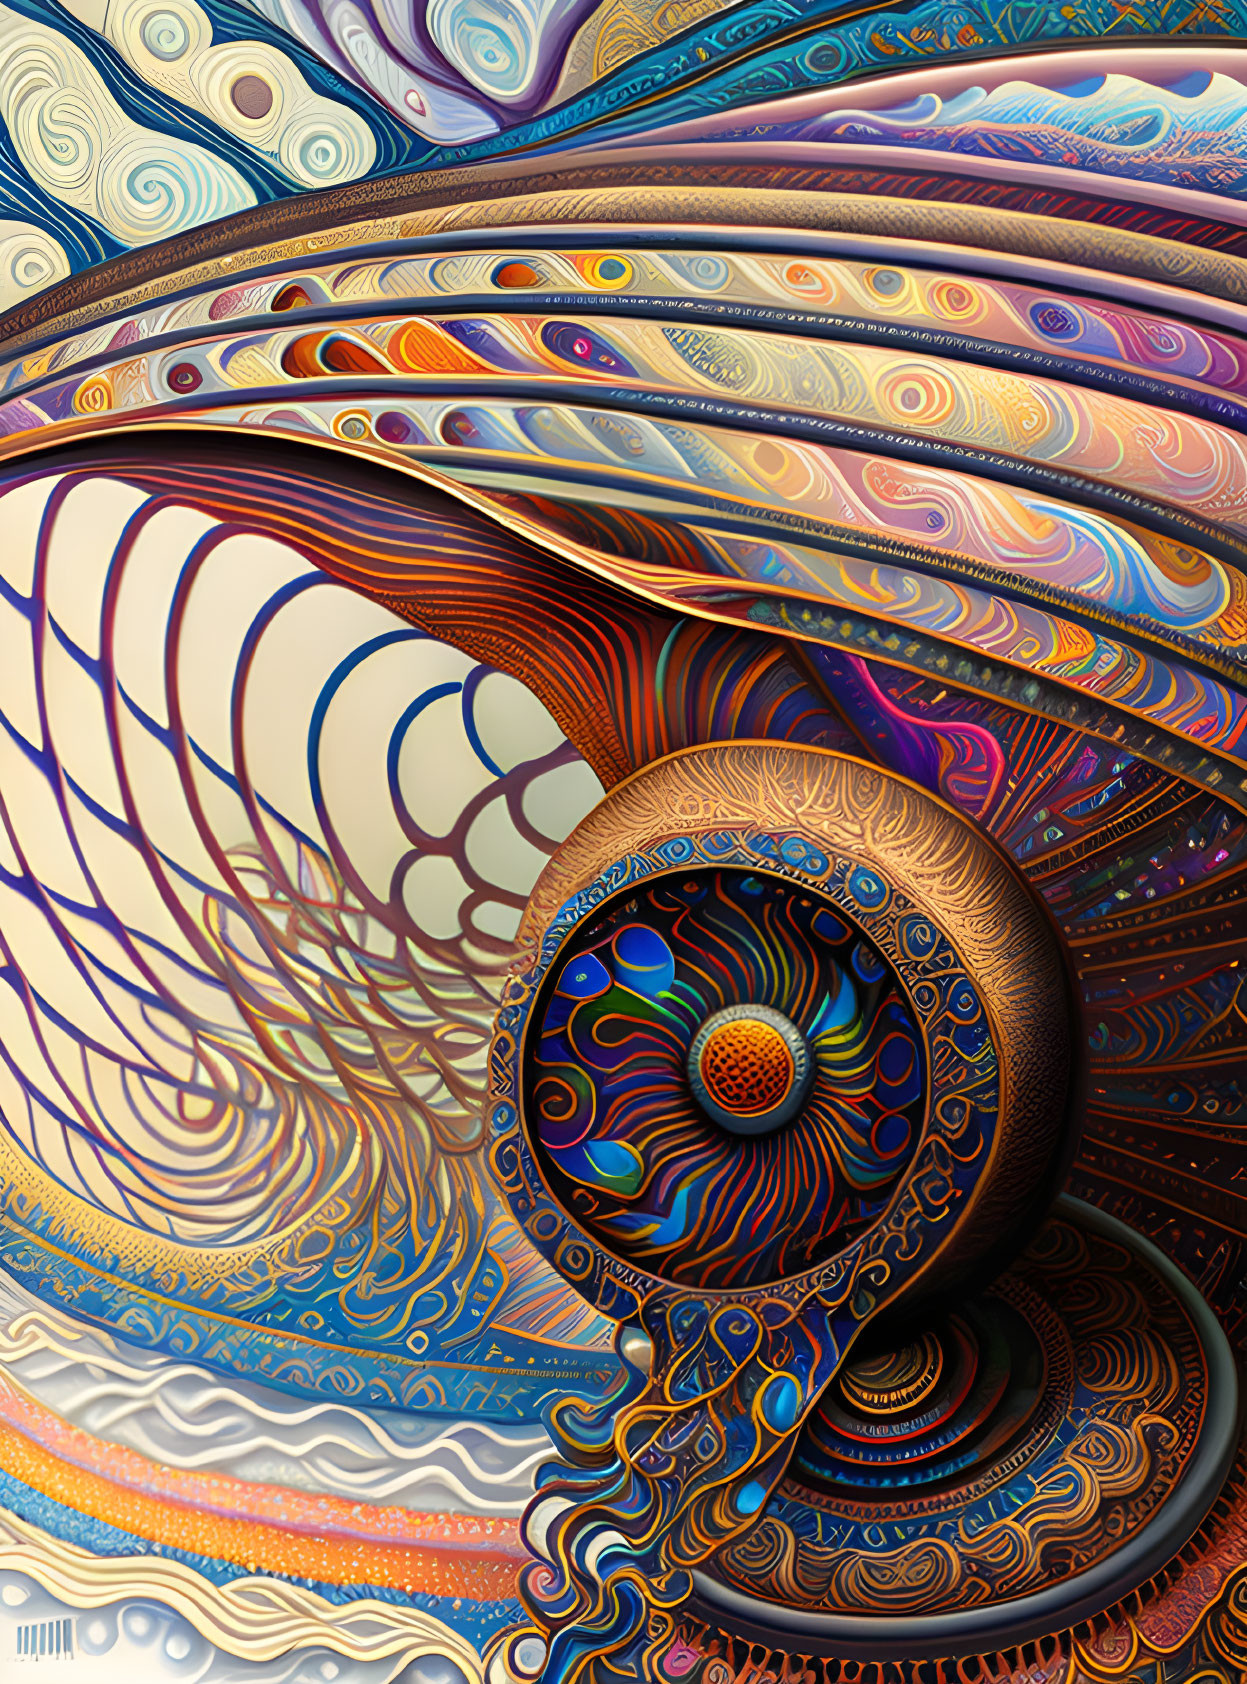 Abstract digital artwork: Vibrant fractal spiral with intricate patterns in blues, oranges, and browns